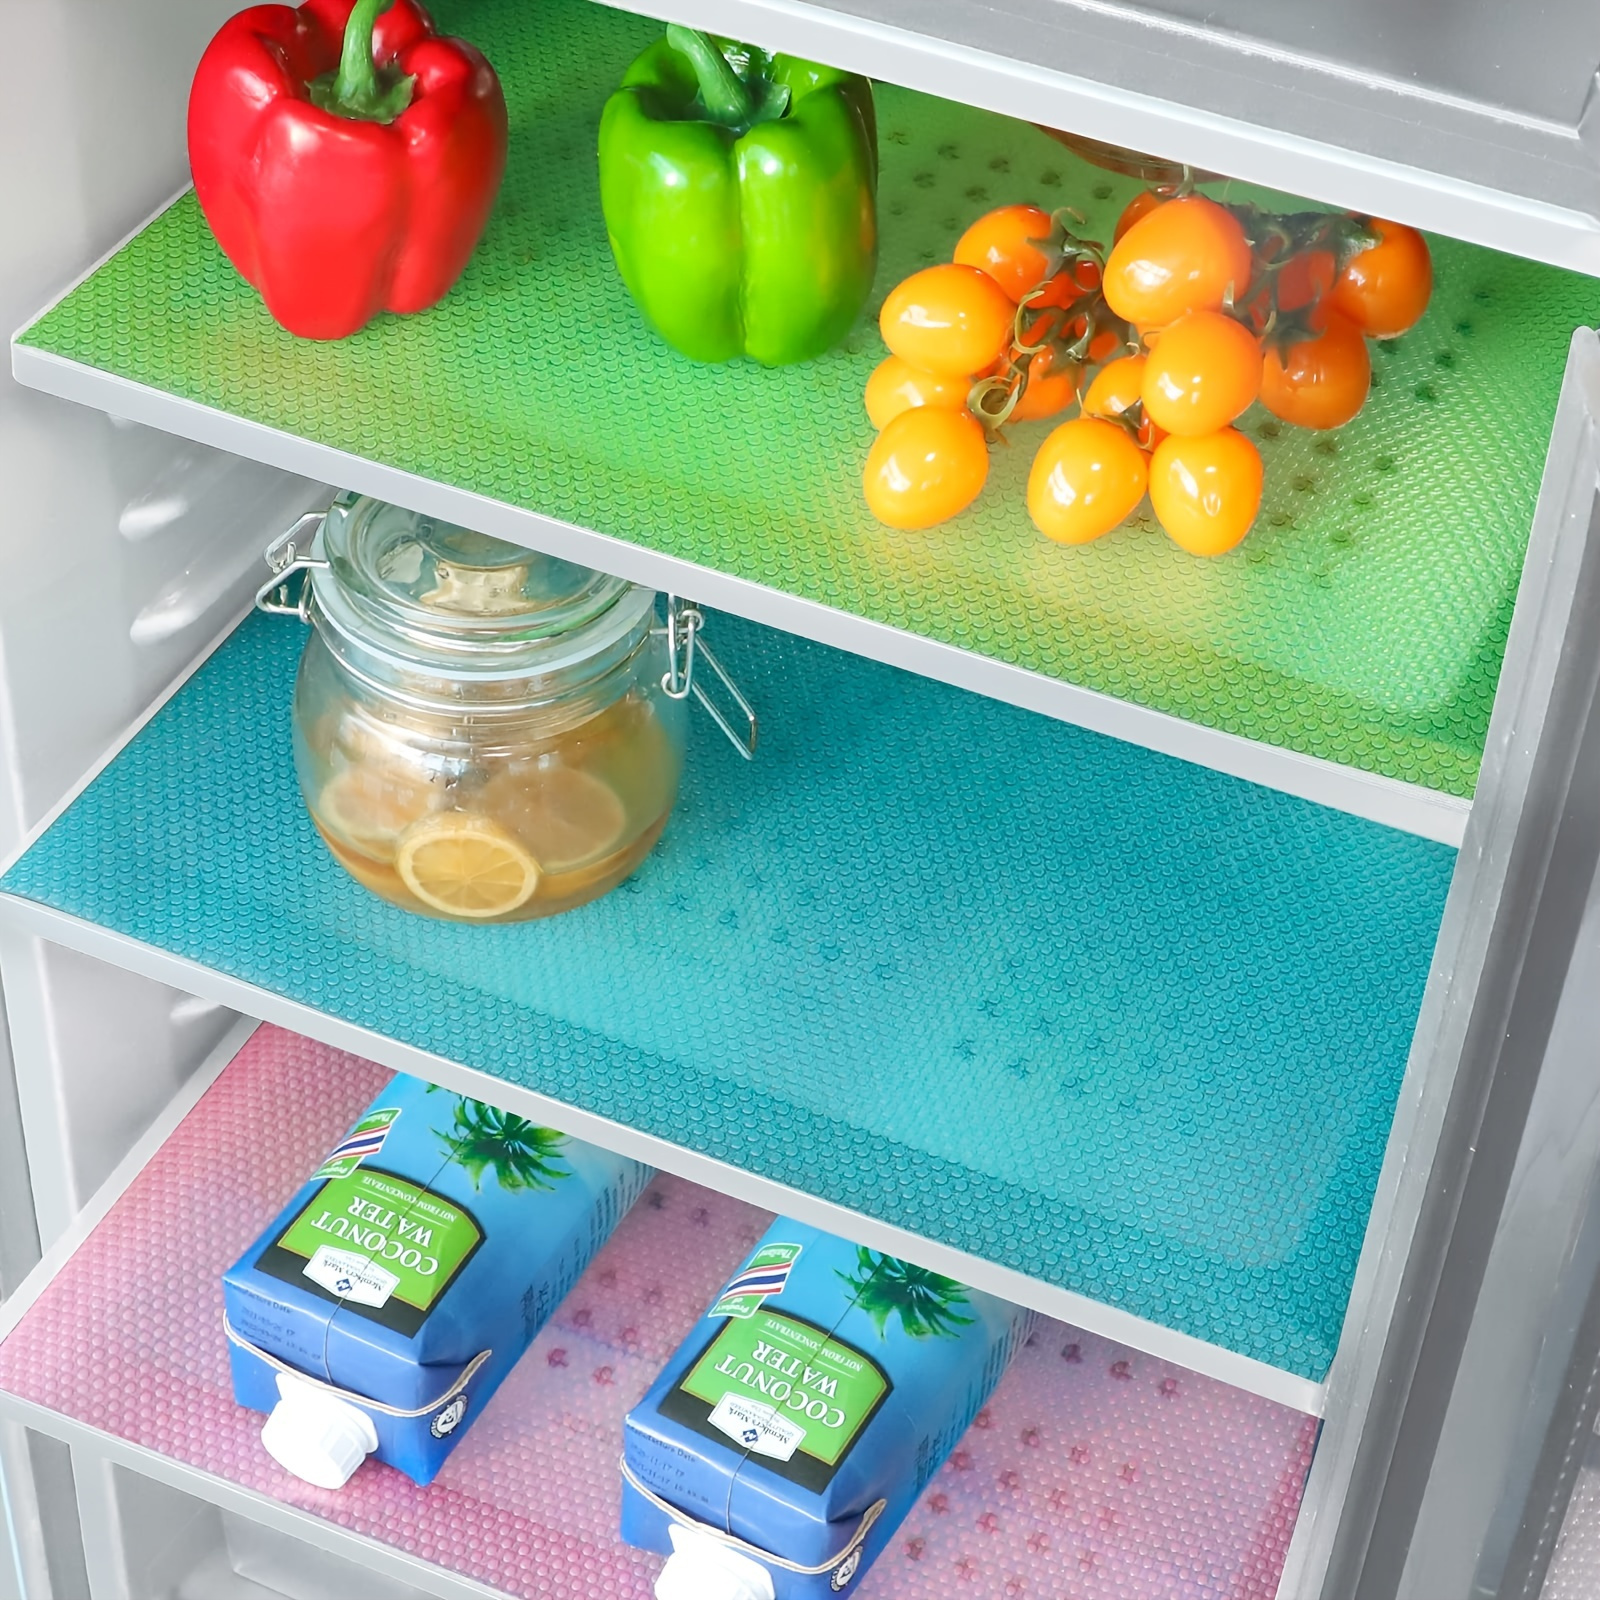 

3/6 Pcs Refrigerator Liners, Refrigerator Shelf Liners Washable, Home Kitchen Gadgets Accessories Organization For Top Freezer Glass Shelf Wire Shelving Cupboard Cabinet Drawers ( Blue Green Red)